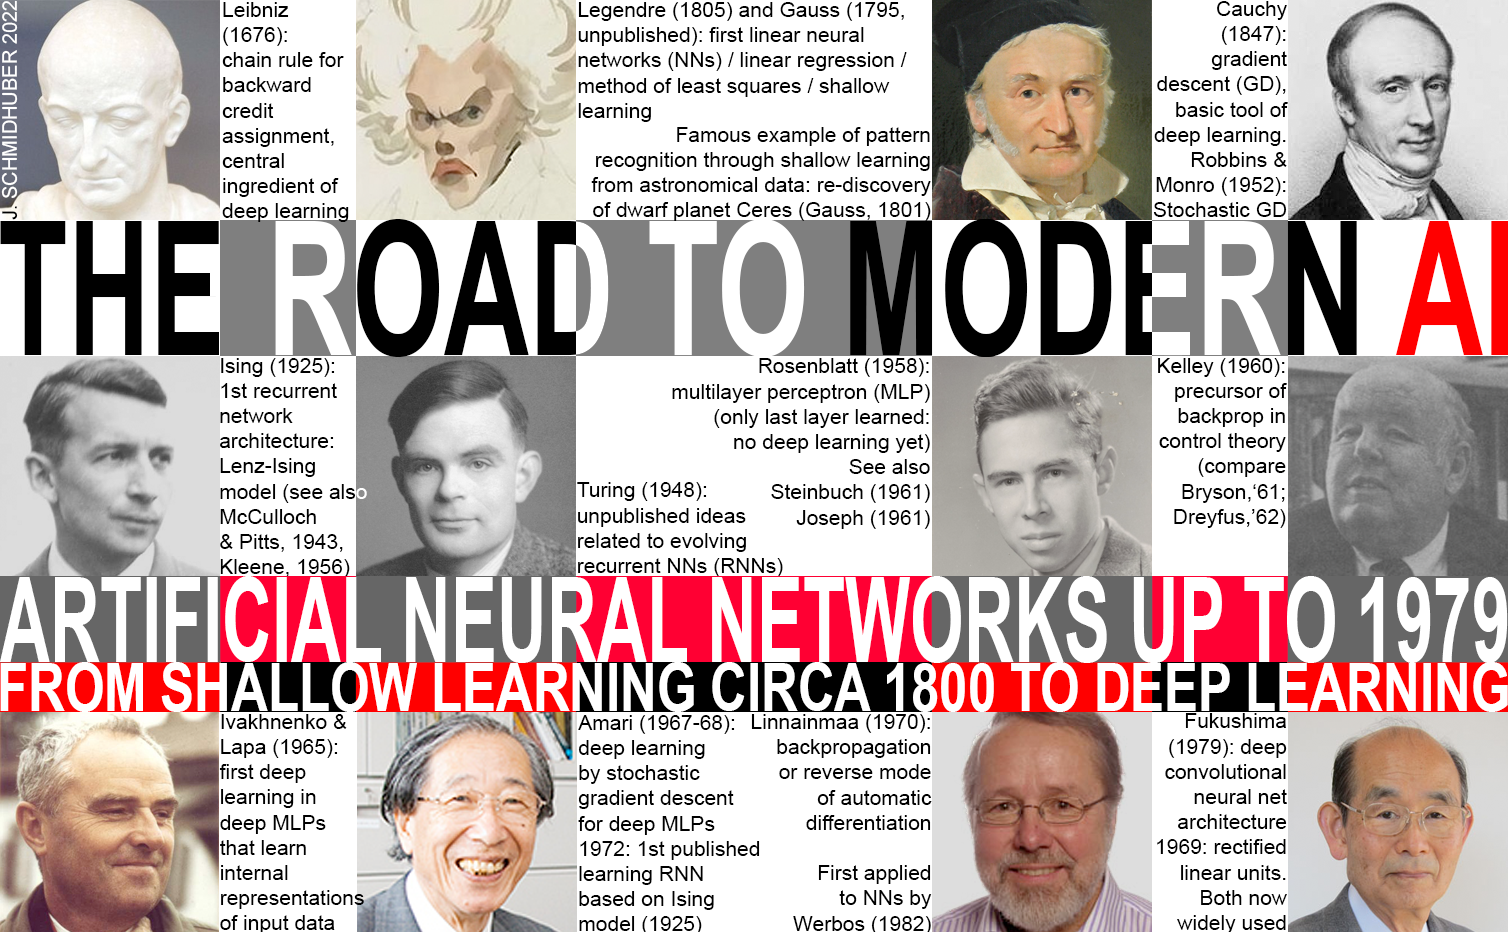 Annotated history of modern AI and deep neural networks